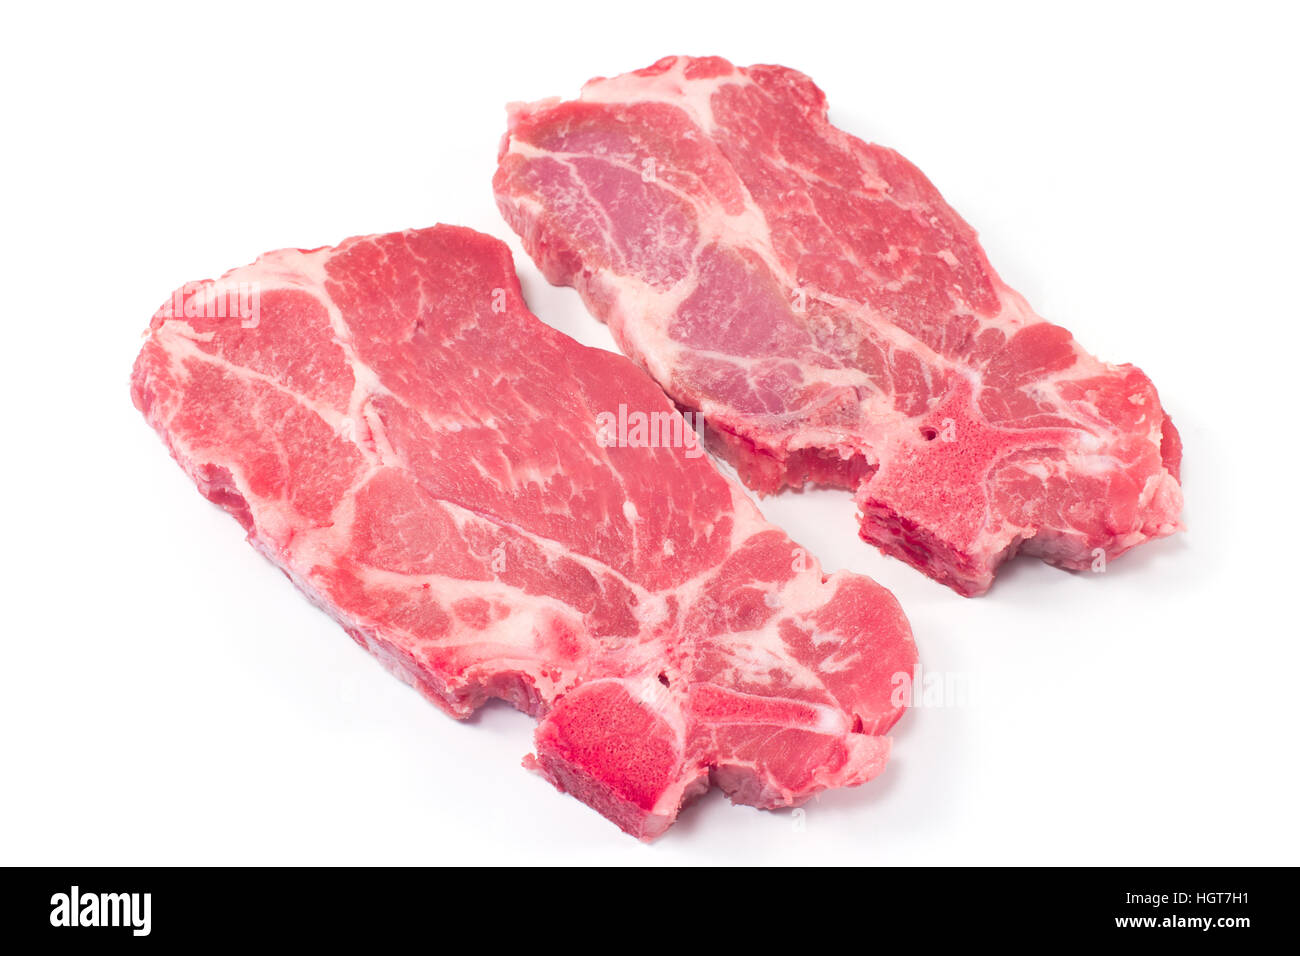 Pork neck chop meat isolated on white Stock Photo